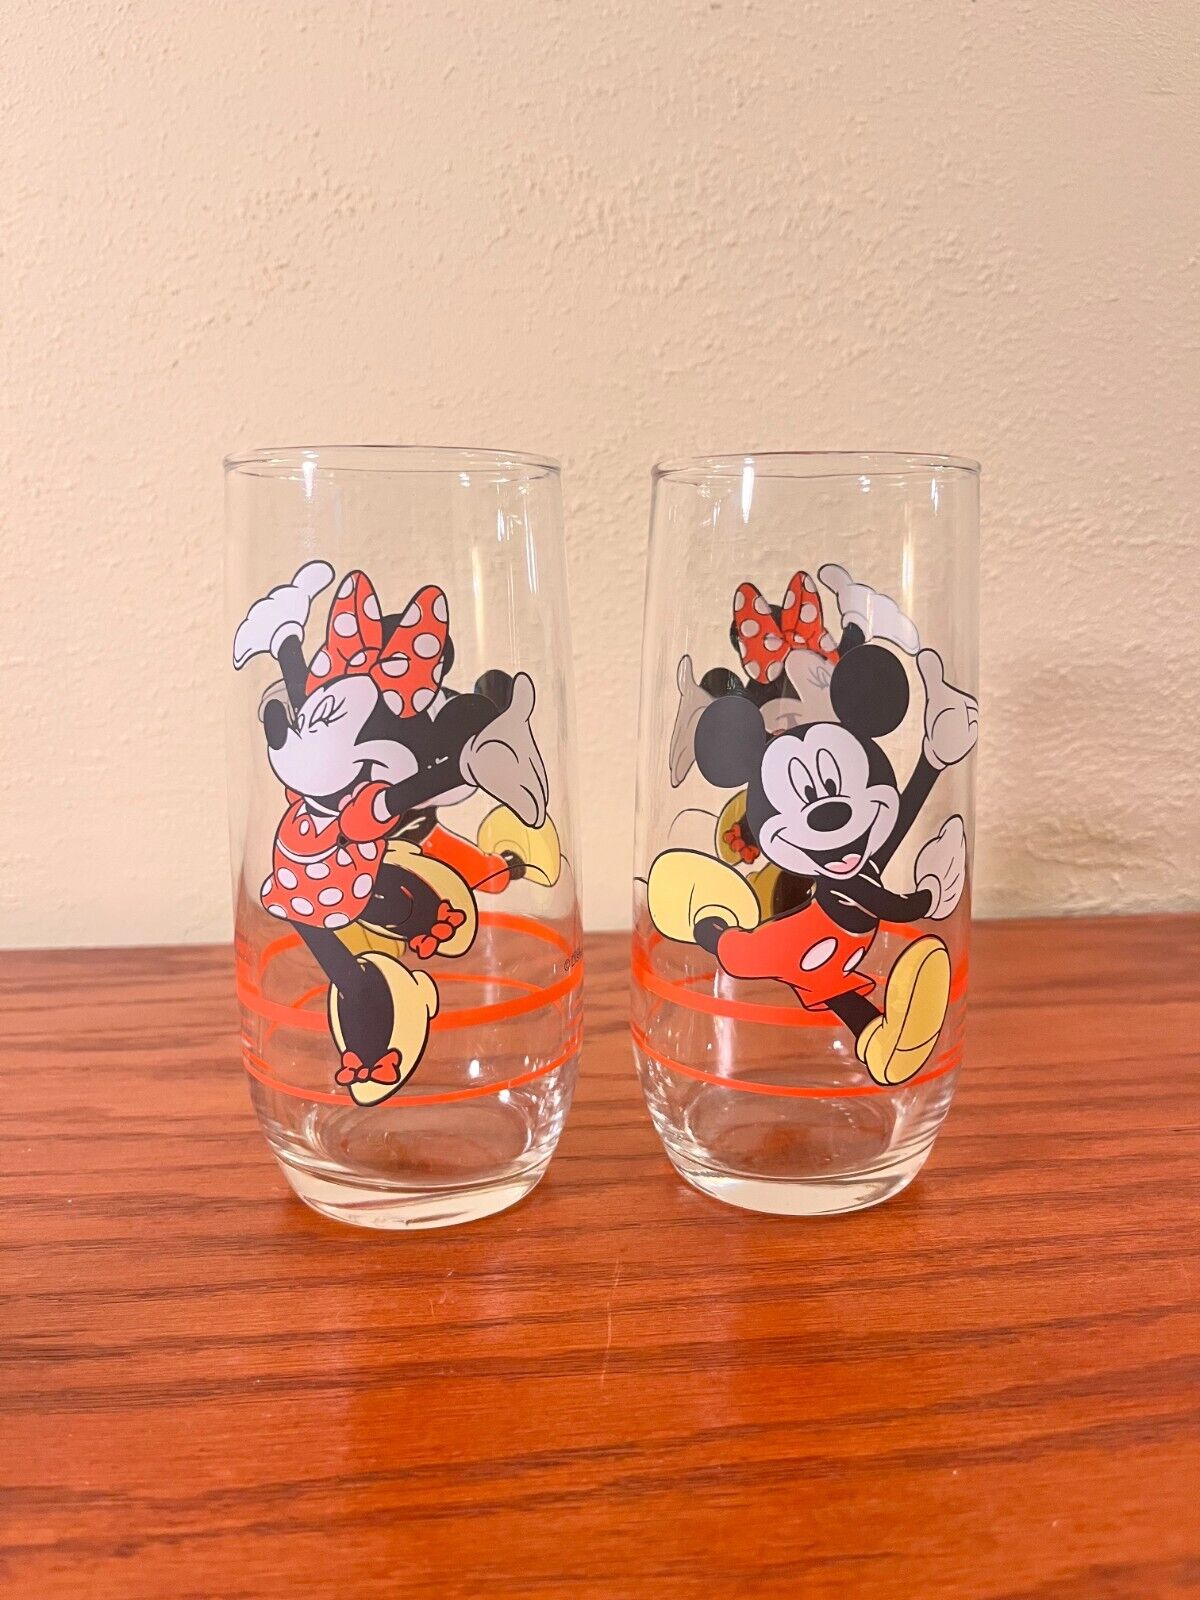 Vintage Disney Mickey and Minnie Double Graphic Collectable Drinking Glasses 6